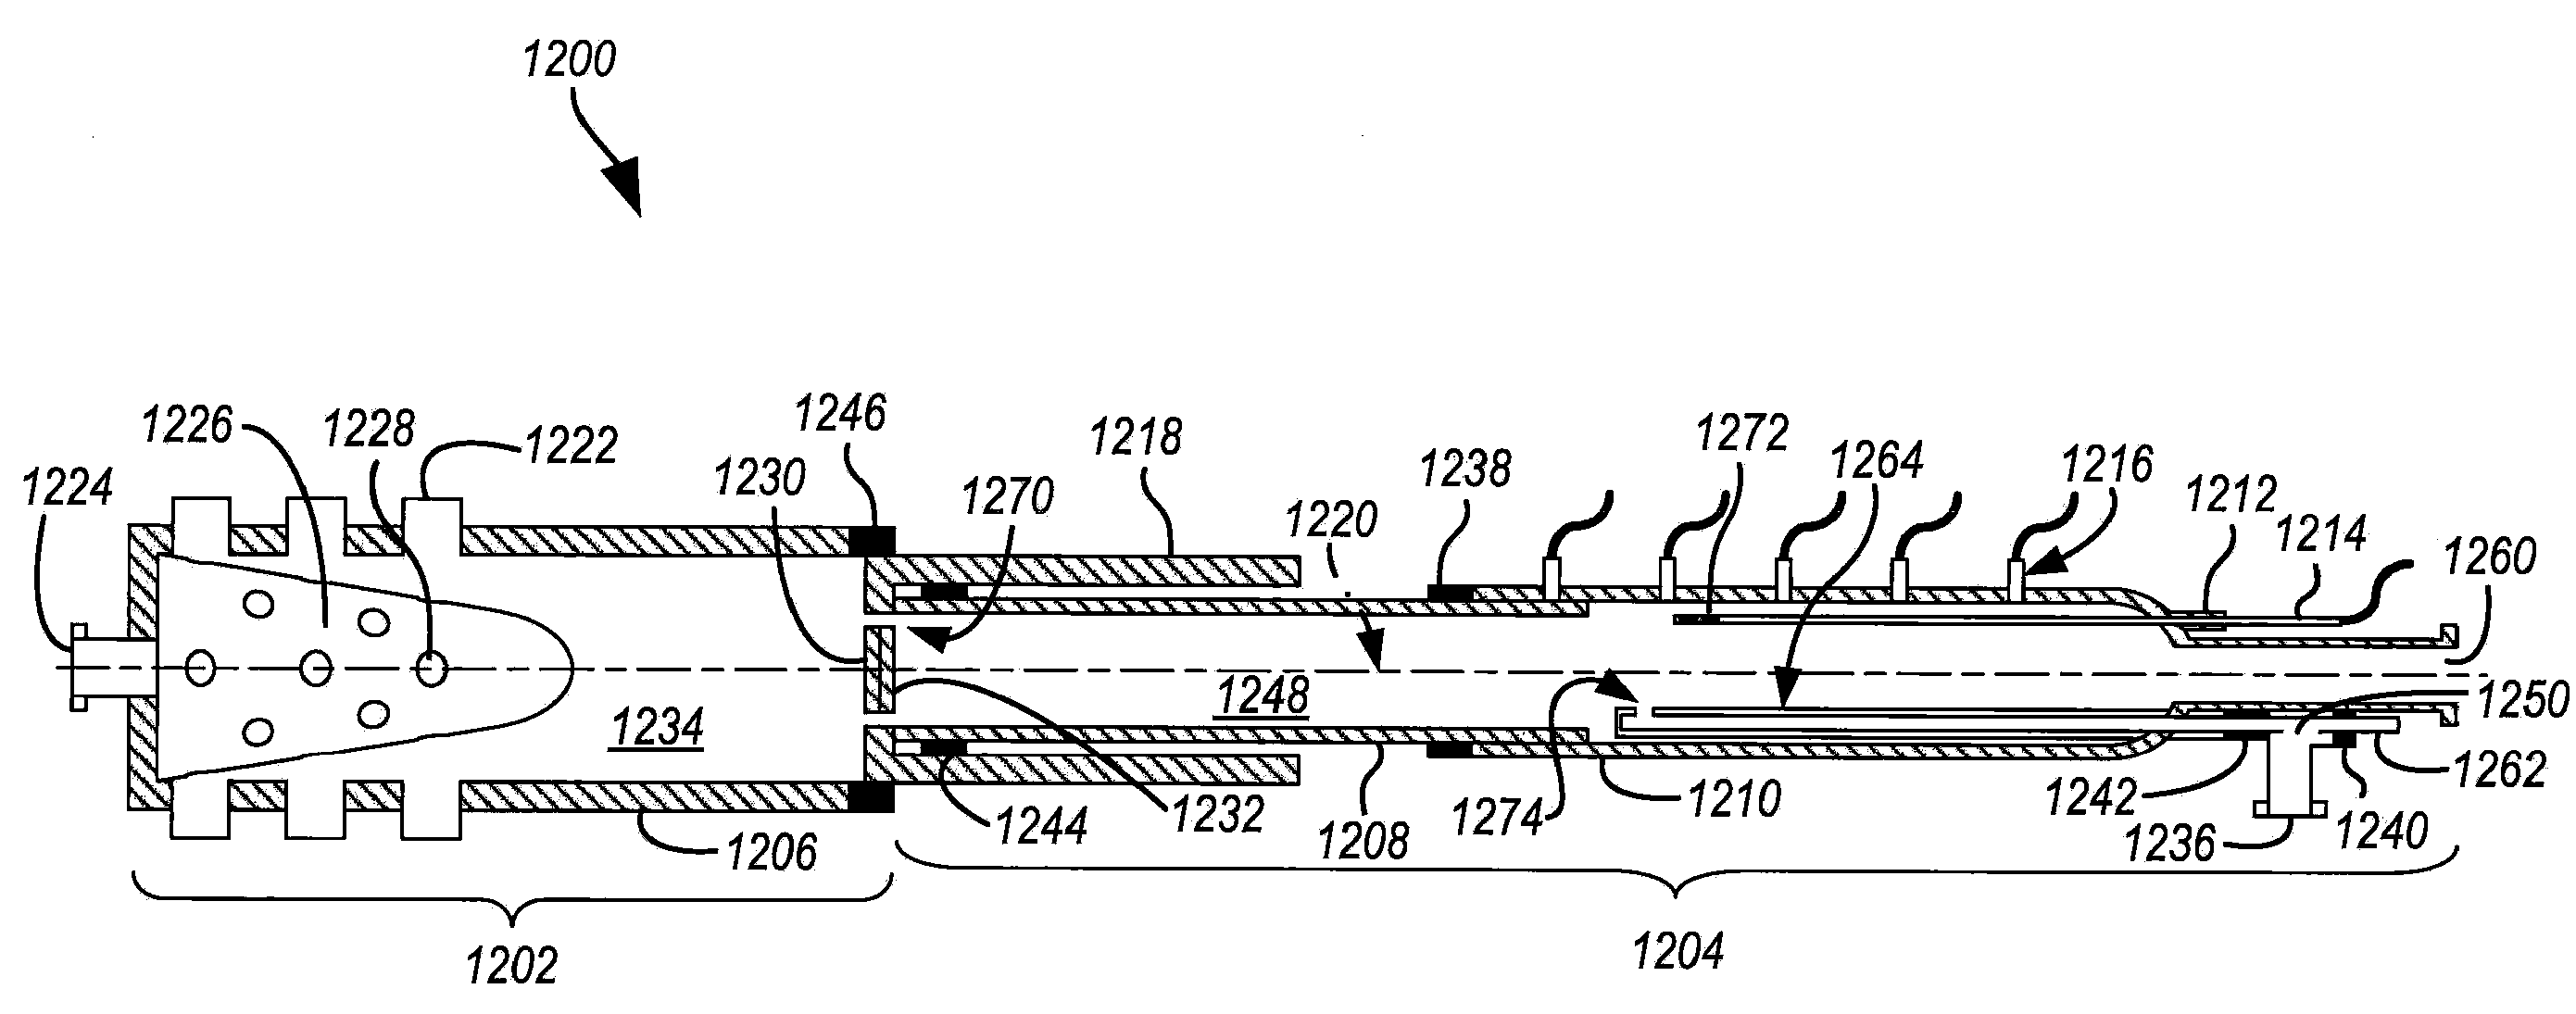 Tandem reactor system having an injectively-mixed backmixing reaction chamber, tubular-reactor, and axially movable interface